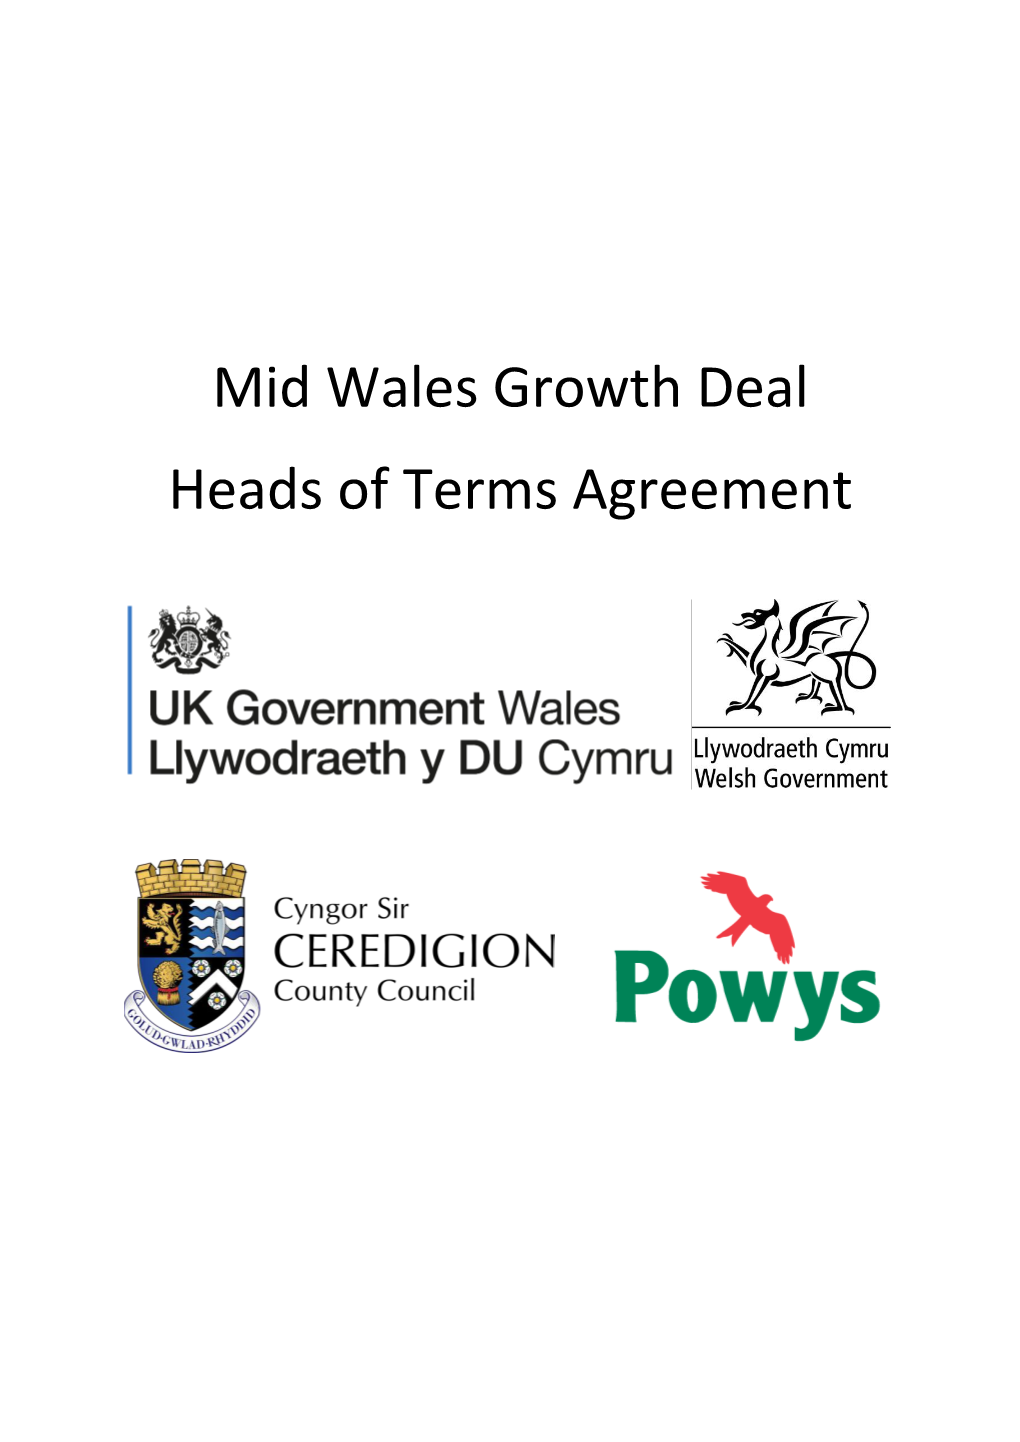 Mid Wales Growth Deal Heads of Terms Document 2020